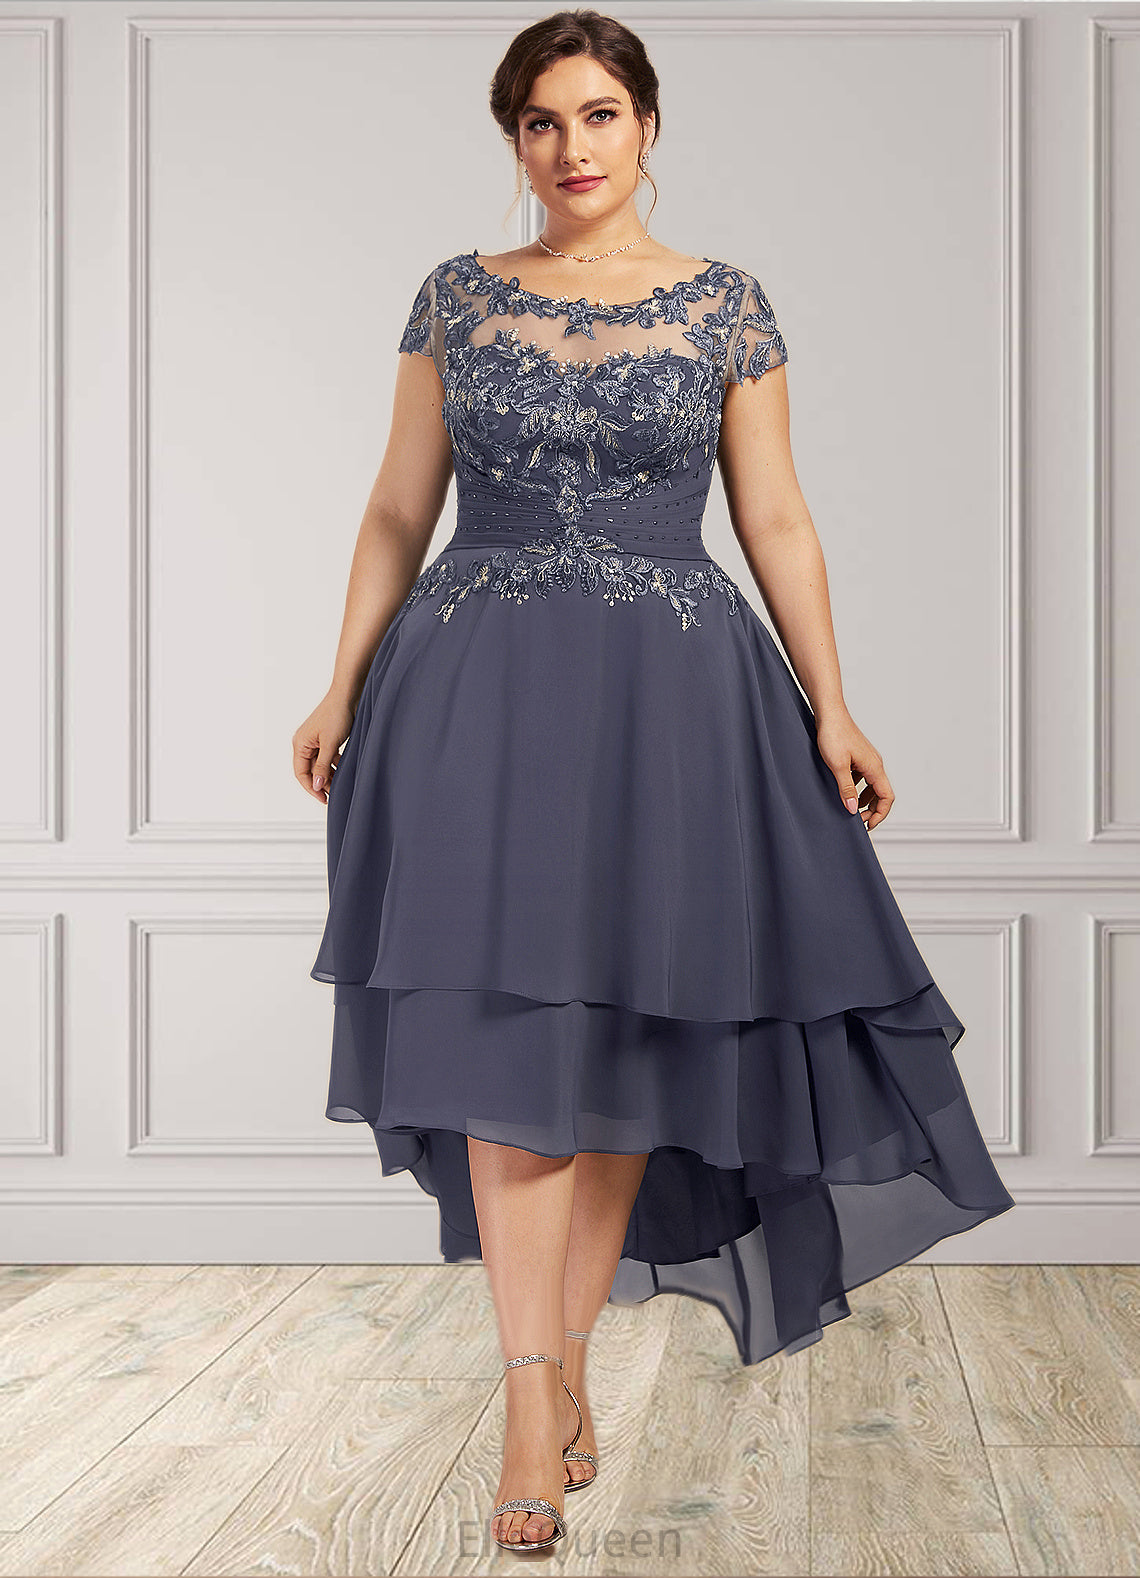 Destinee A-Line Scoop Neck Asymmetrical Chiffon Lace Mother of the Bride Dress With Beading DG126P0014534